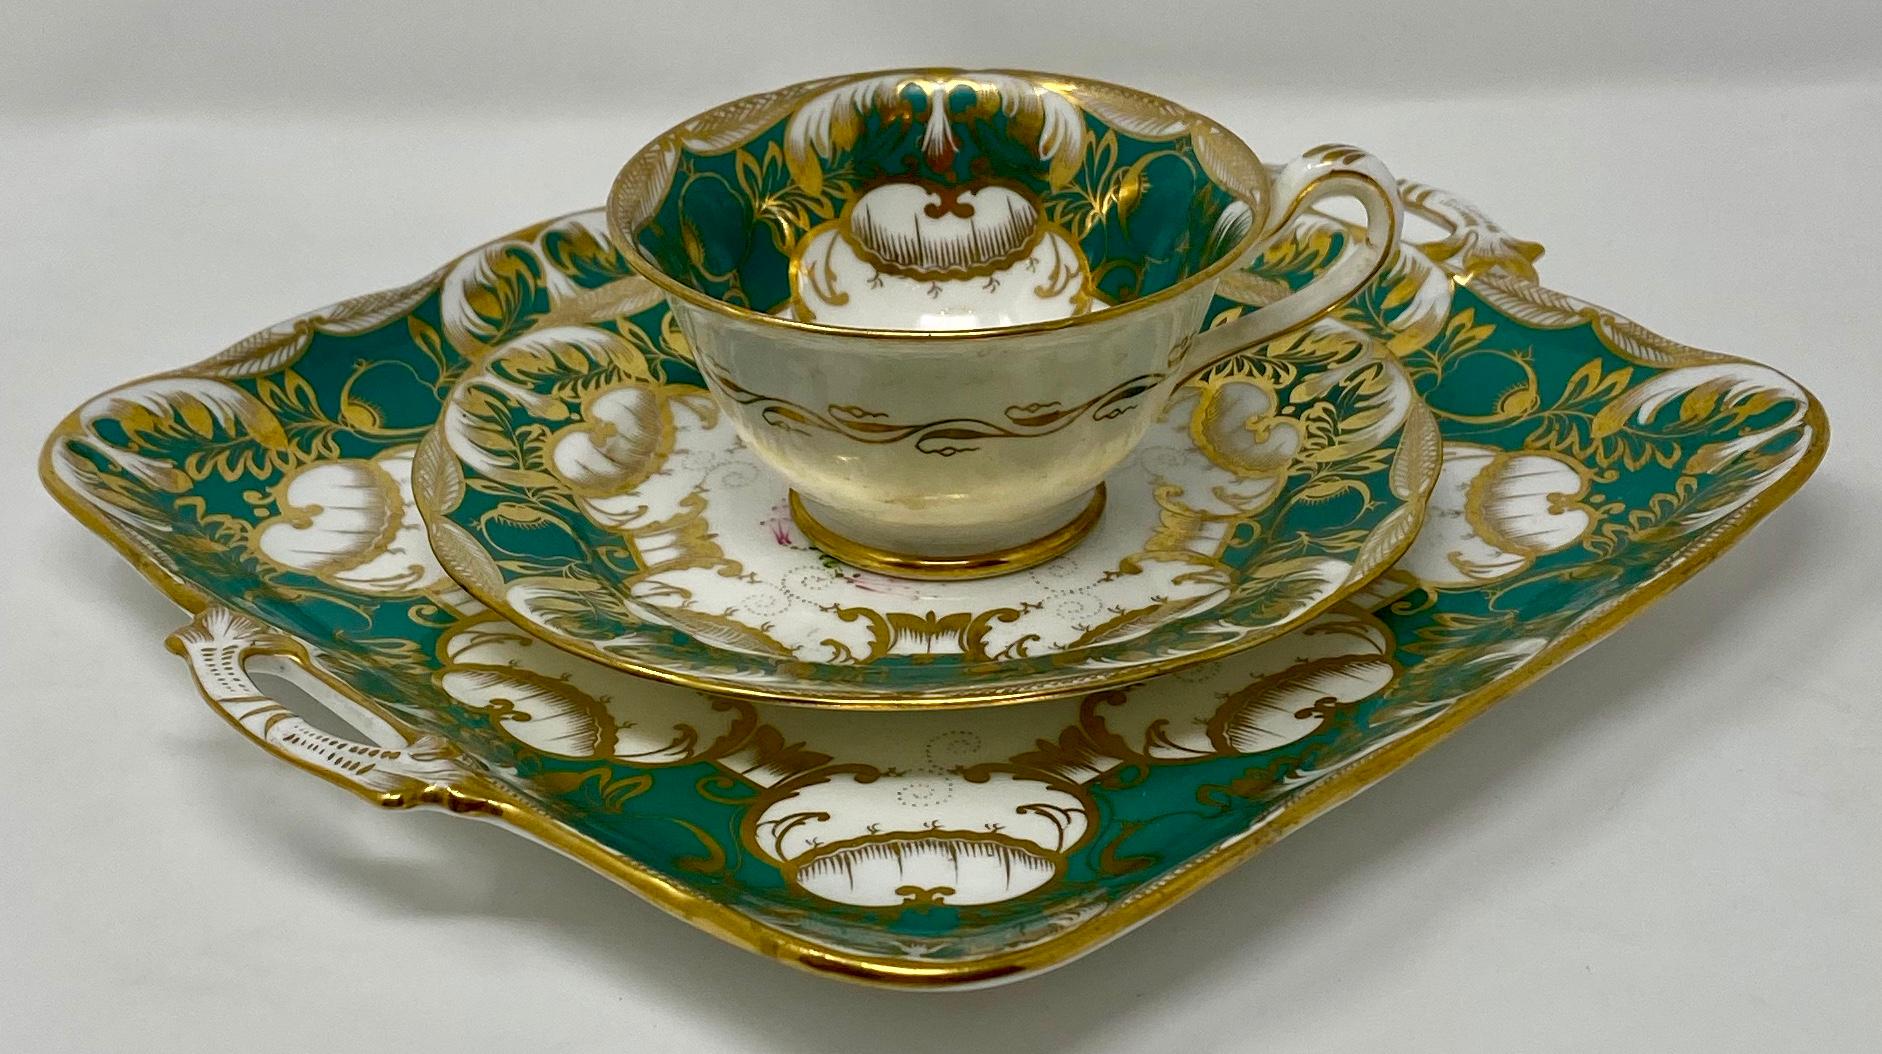 This lovely Antique English 19th century porcelain dessert and coffee set consists of 10 pieces. The coloring on the pieces has remained strong. The green is particularly lovely and different.


